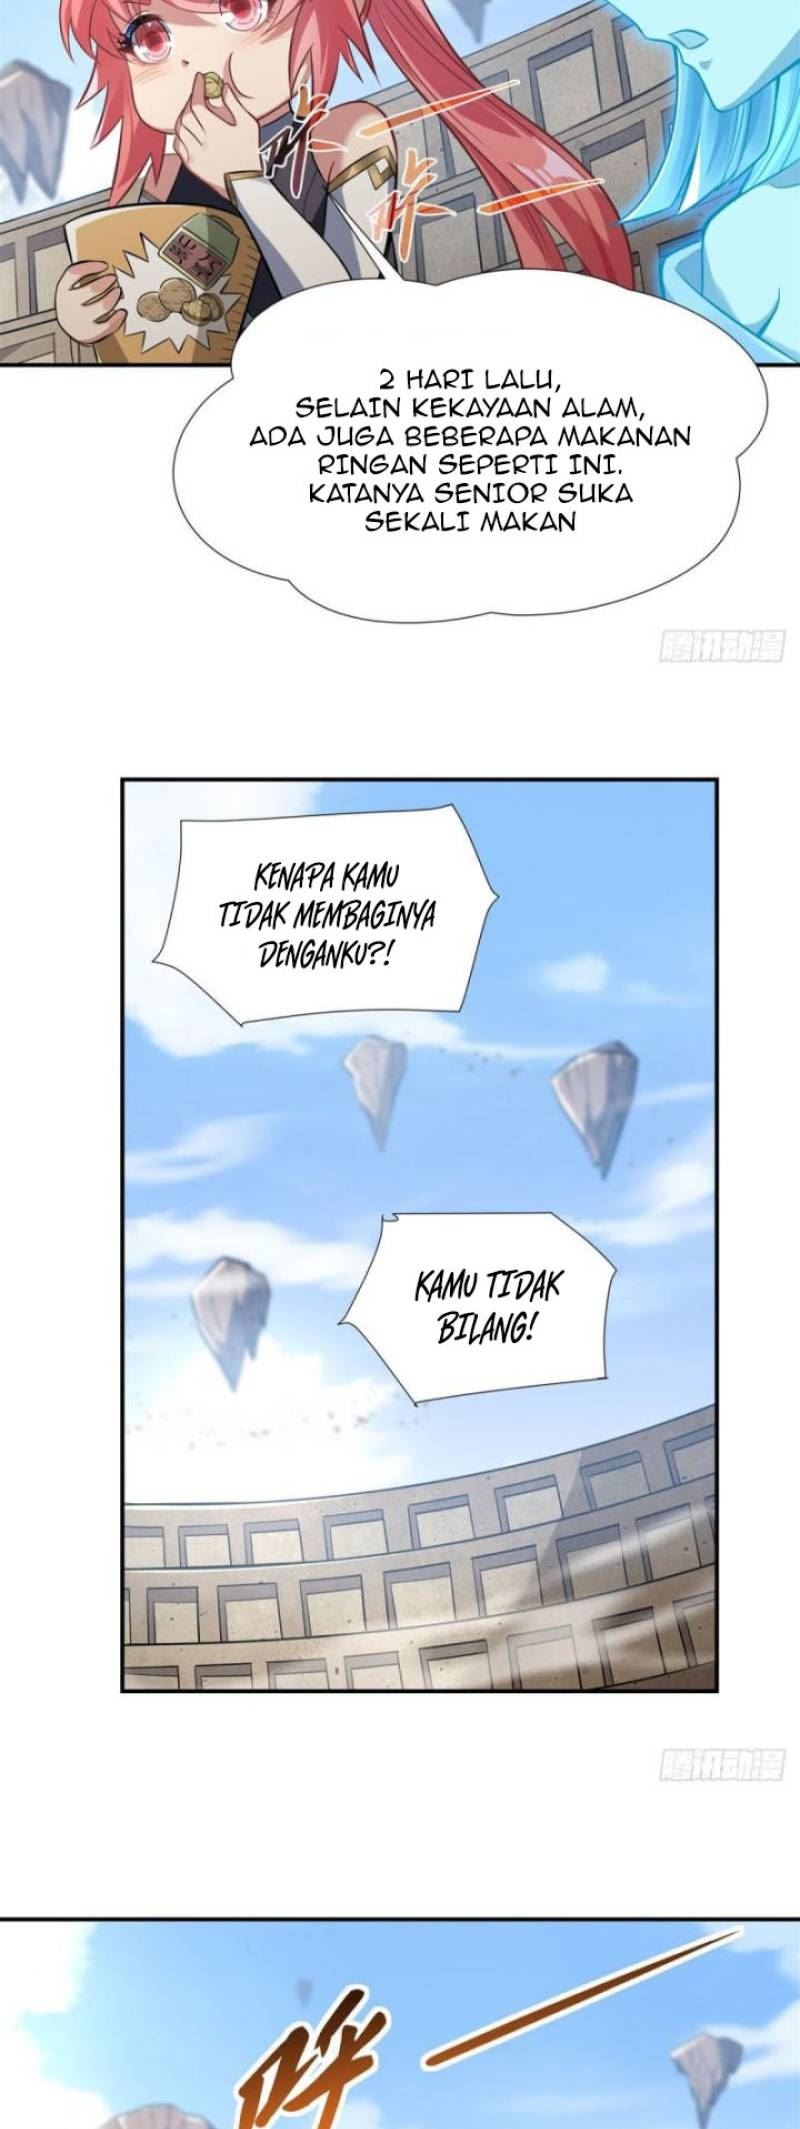 Dilarang COPAS - situs resmi www.mangacanblog.com - Komik my female apprentices are all big shots from the future 082 - chapter 82 83 Indonesia my female apprentices are all big shots from the future 082 - chapter 82 Terbaru 2|Baca Manga Komik Indonesia|Mangacan